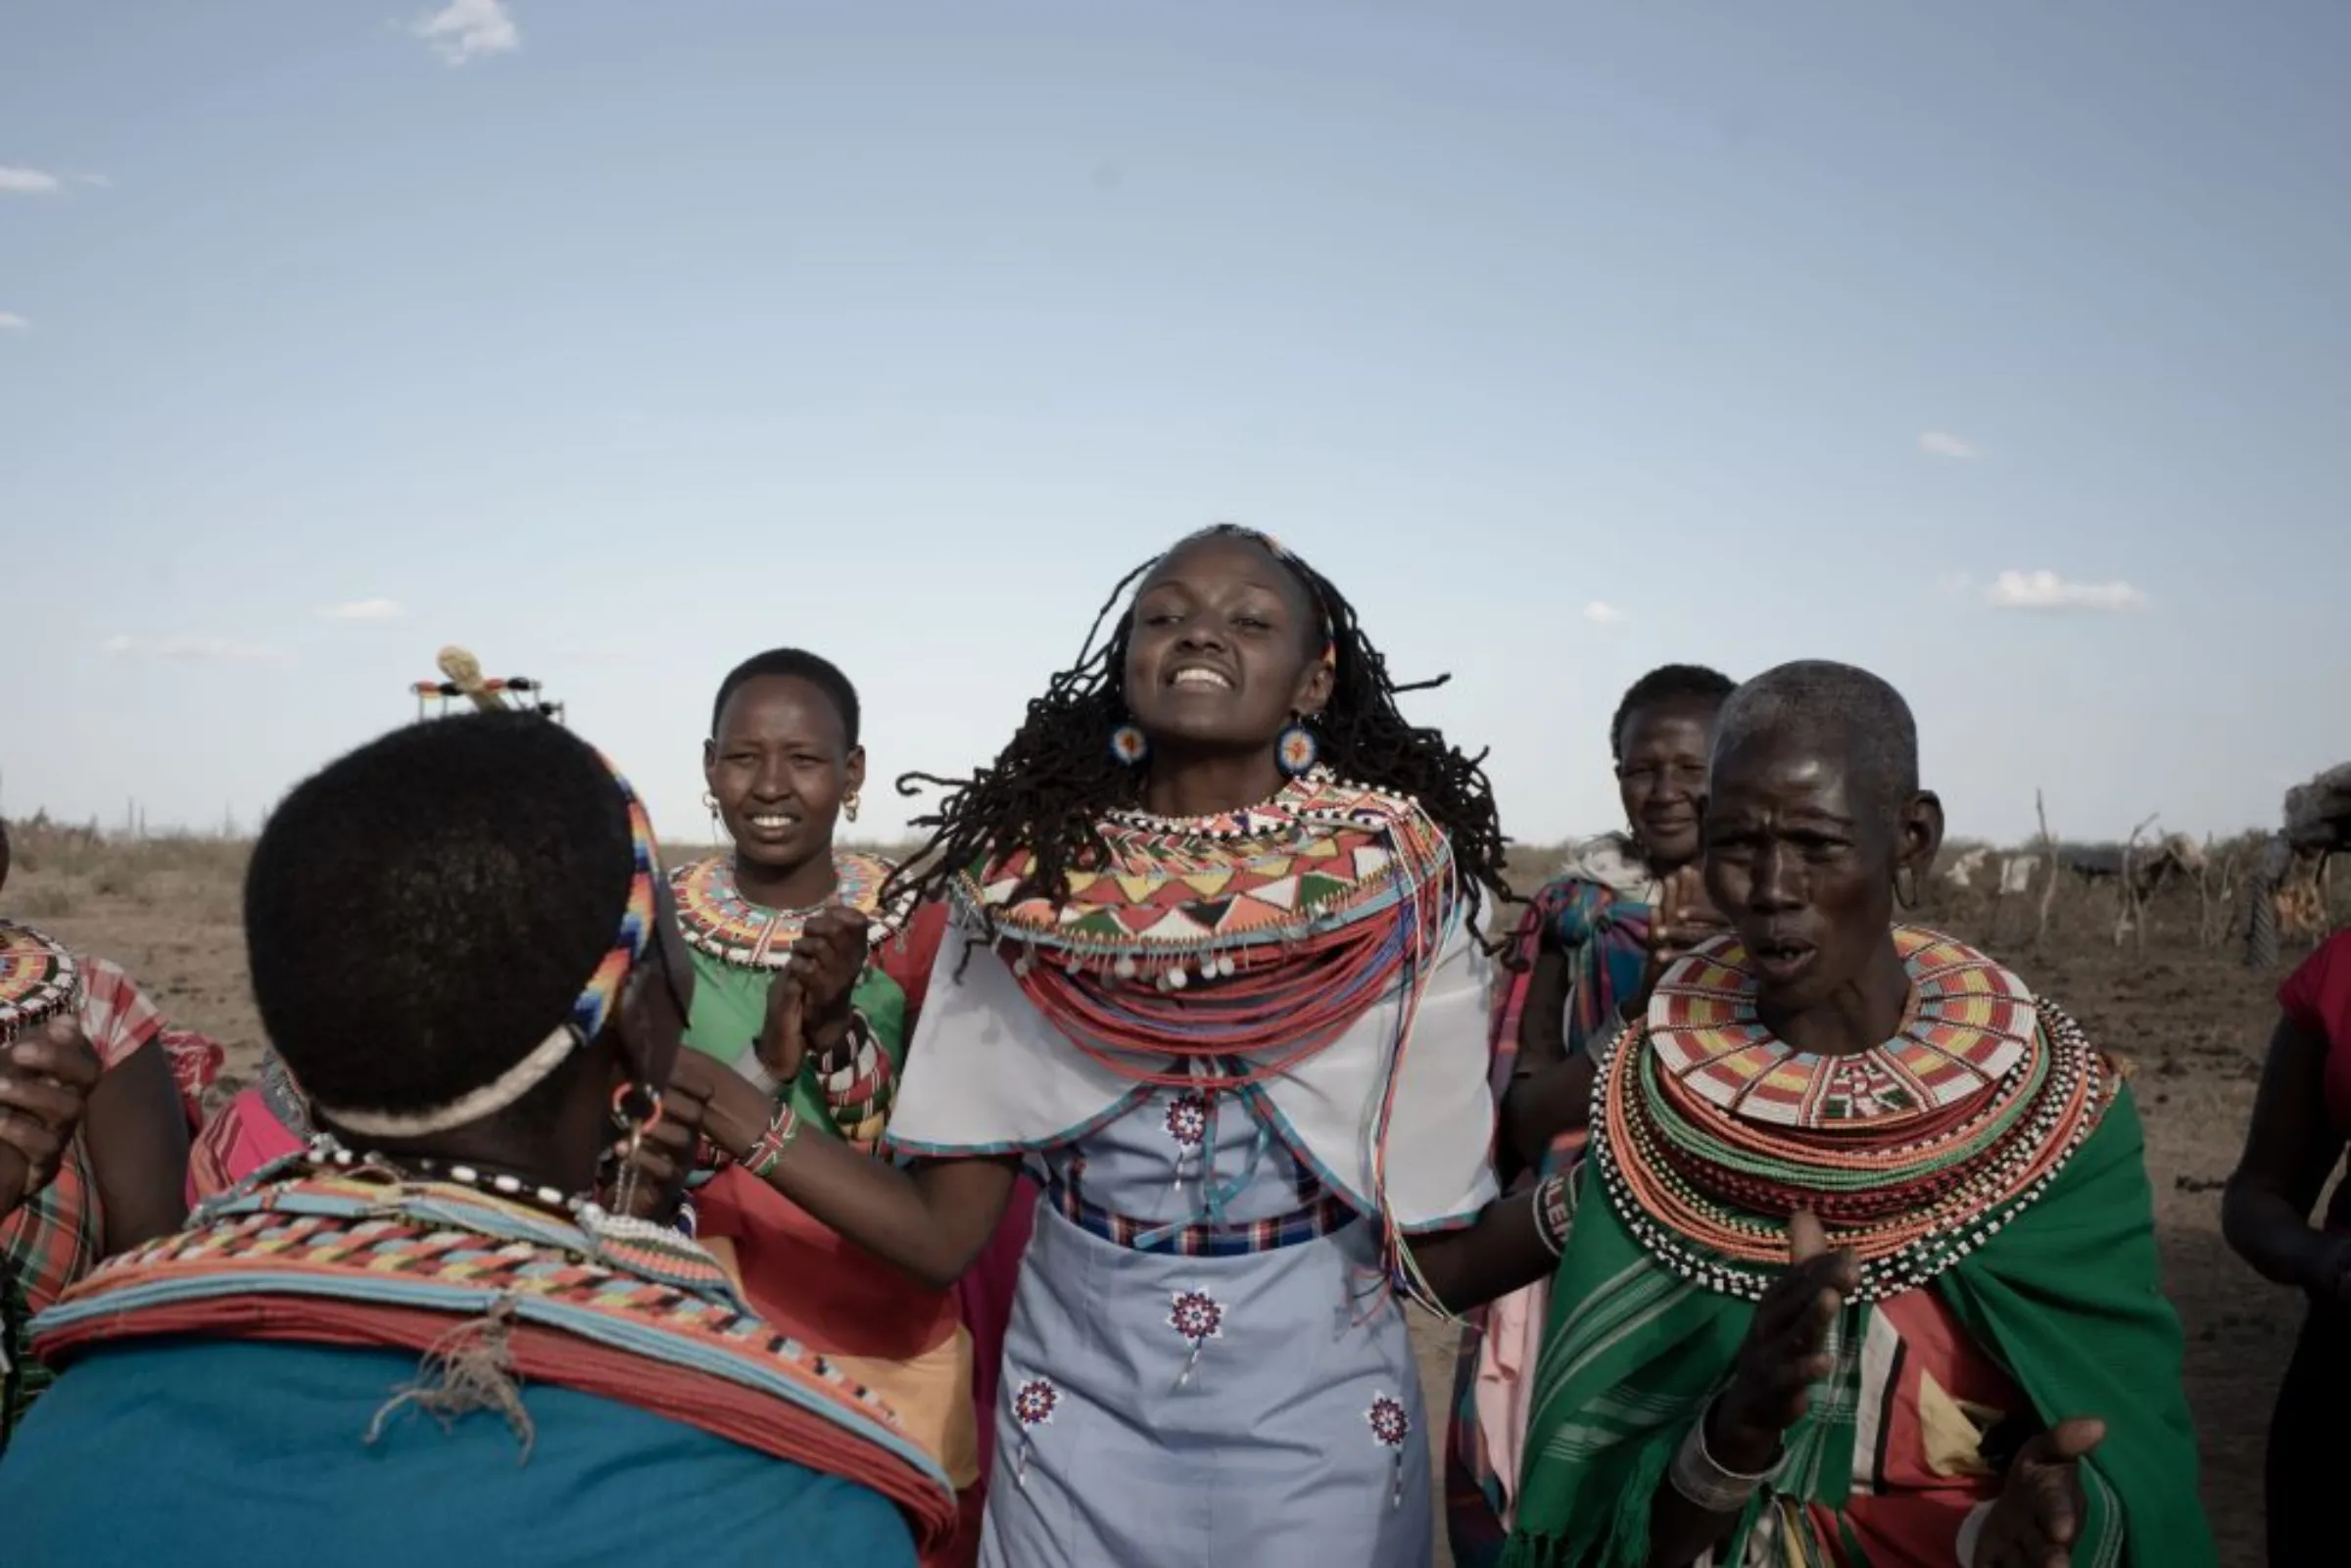 Kenyan girls’ rights campaigner Josephine Kulea, founder of Samburu Girls Foundation, performs a welcome dance with others in her community for Nimco Ali in Maralal, northern Kenya, in 2019